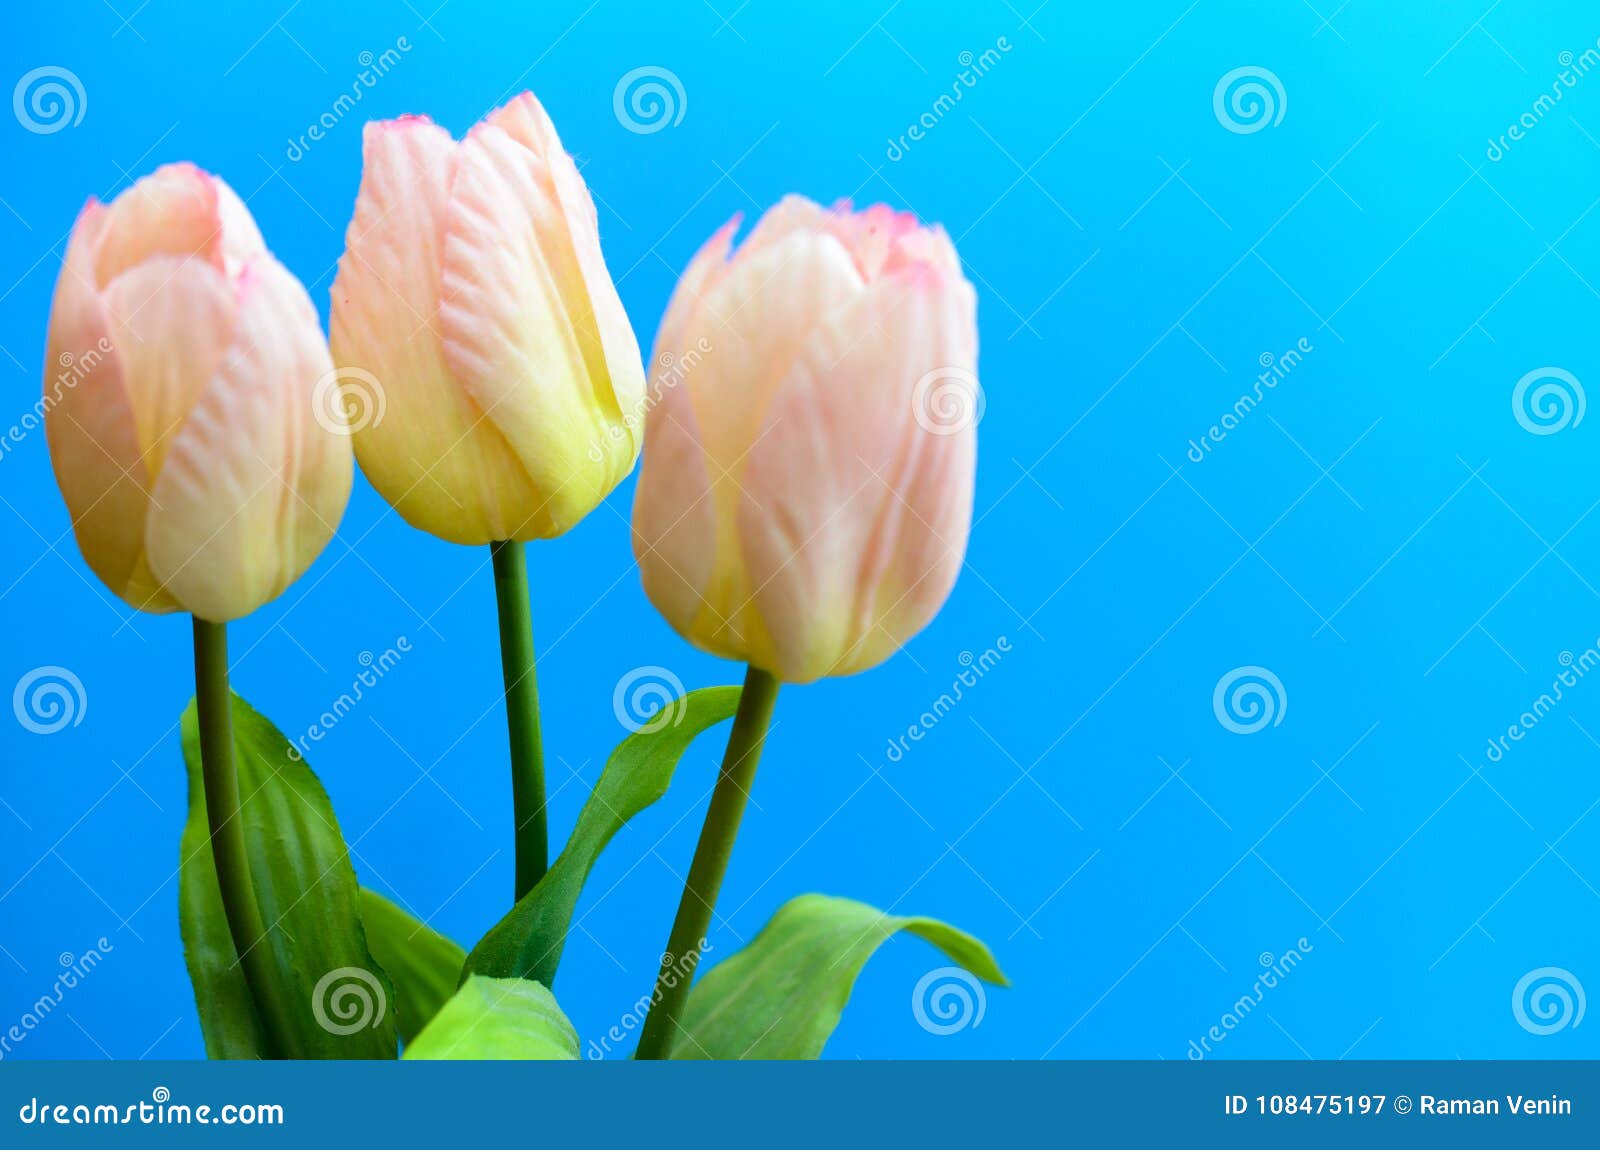 Gently Pink Tulips on a Blue Background. Stock Image - Image of march ...